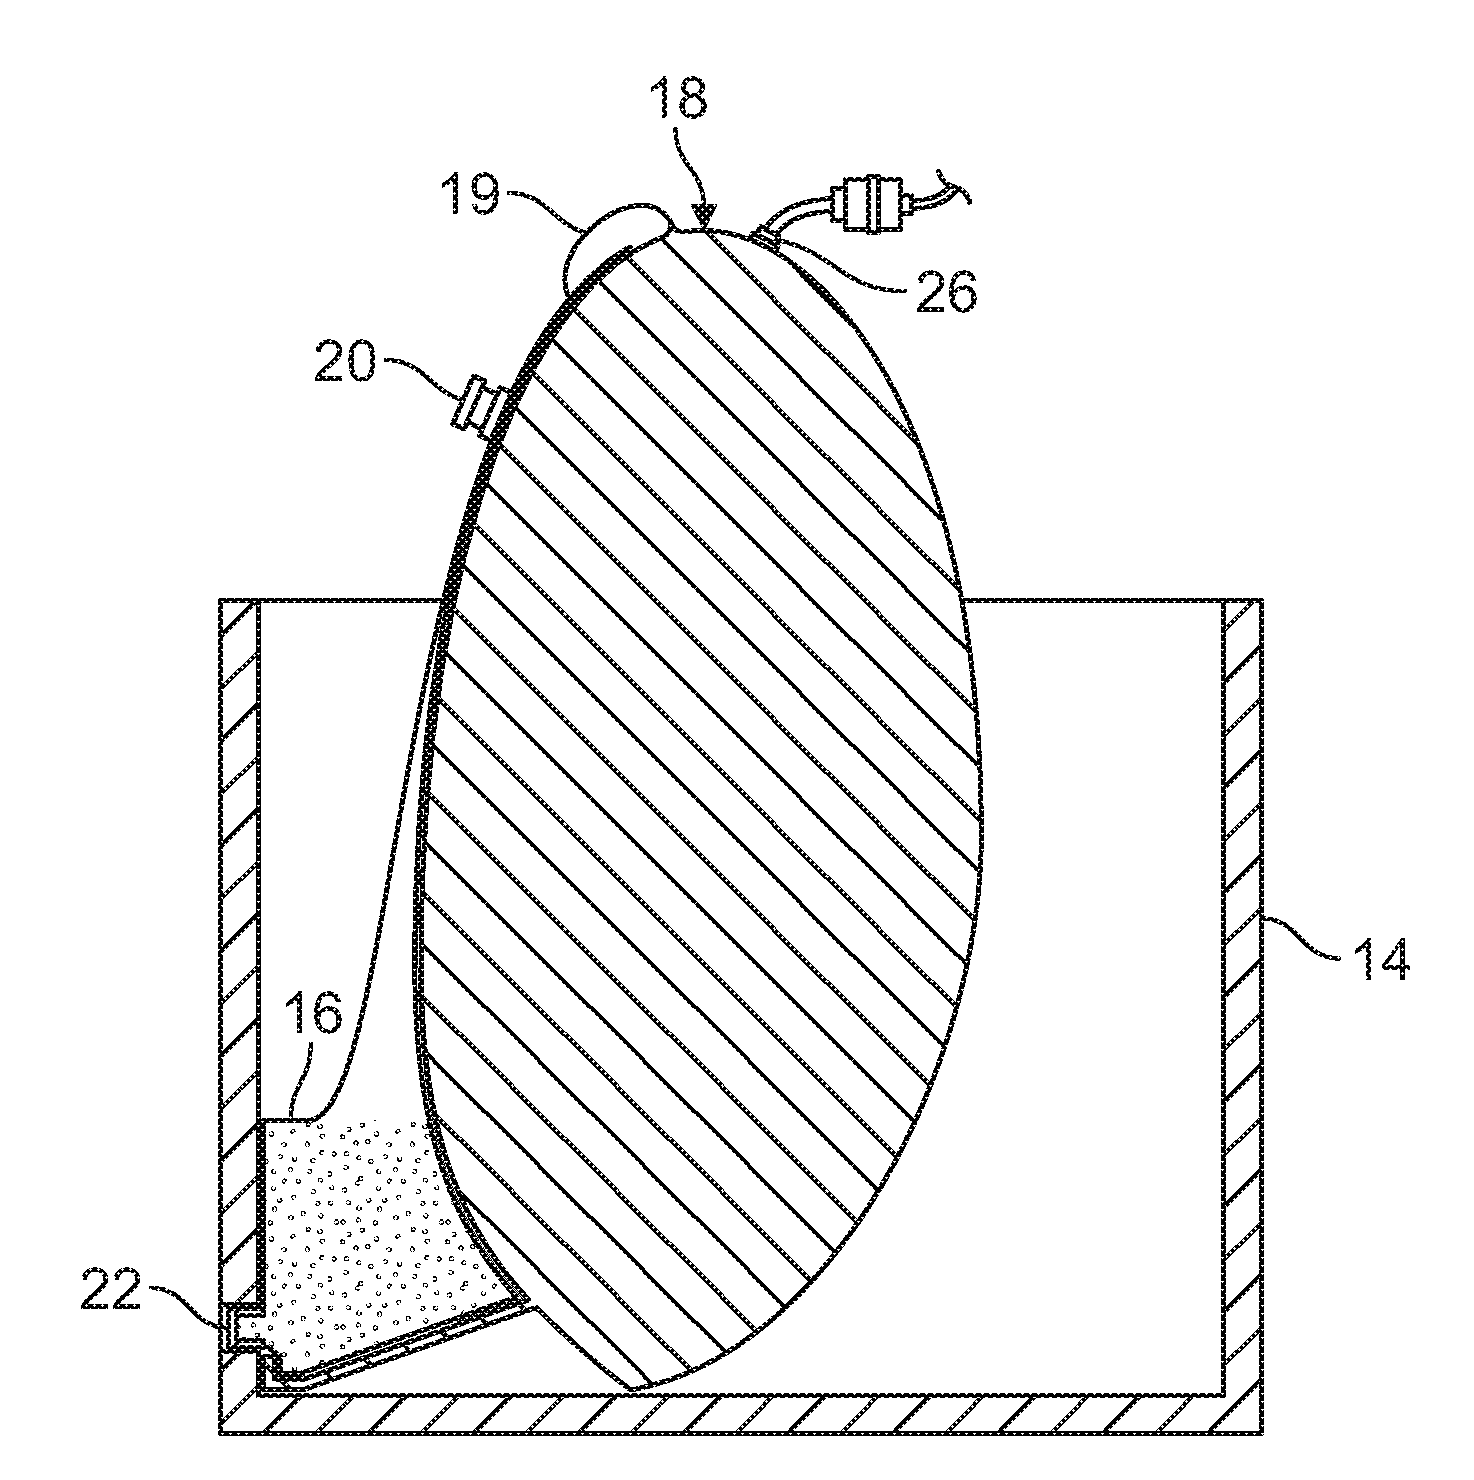 System for complete dispensing of flowable materials from a bulk shipping container